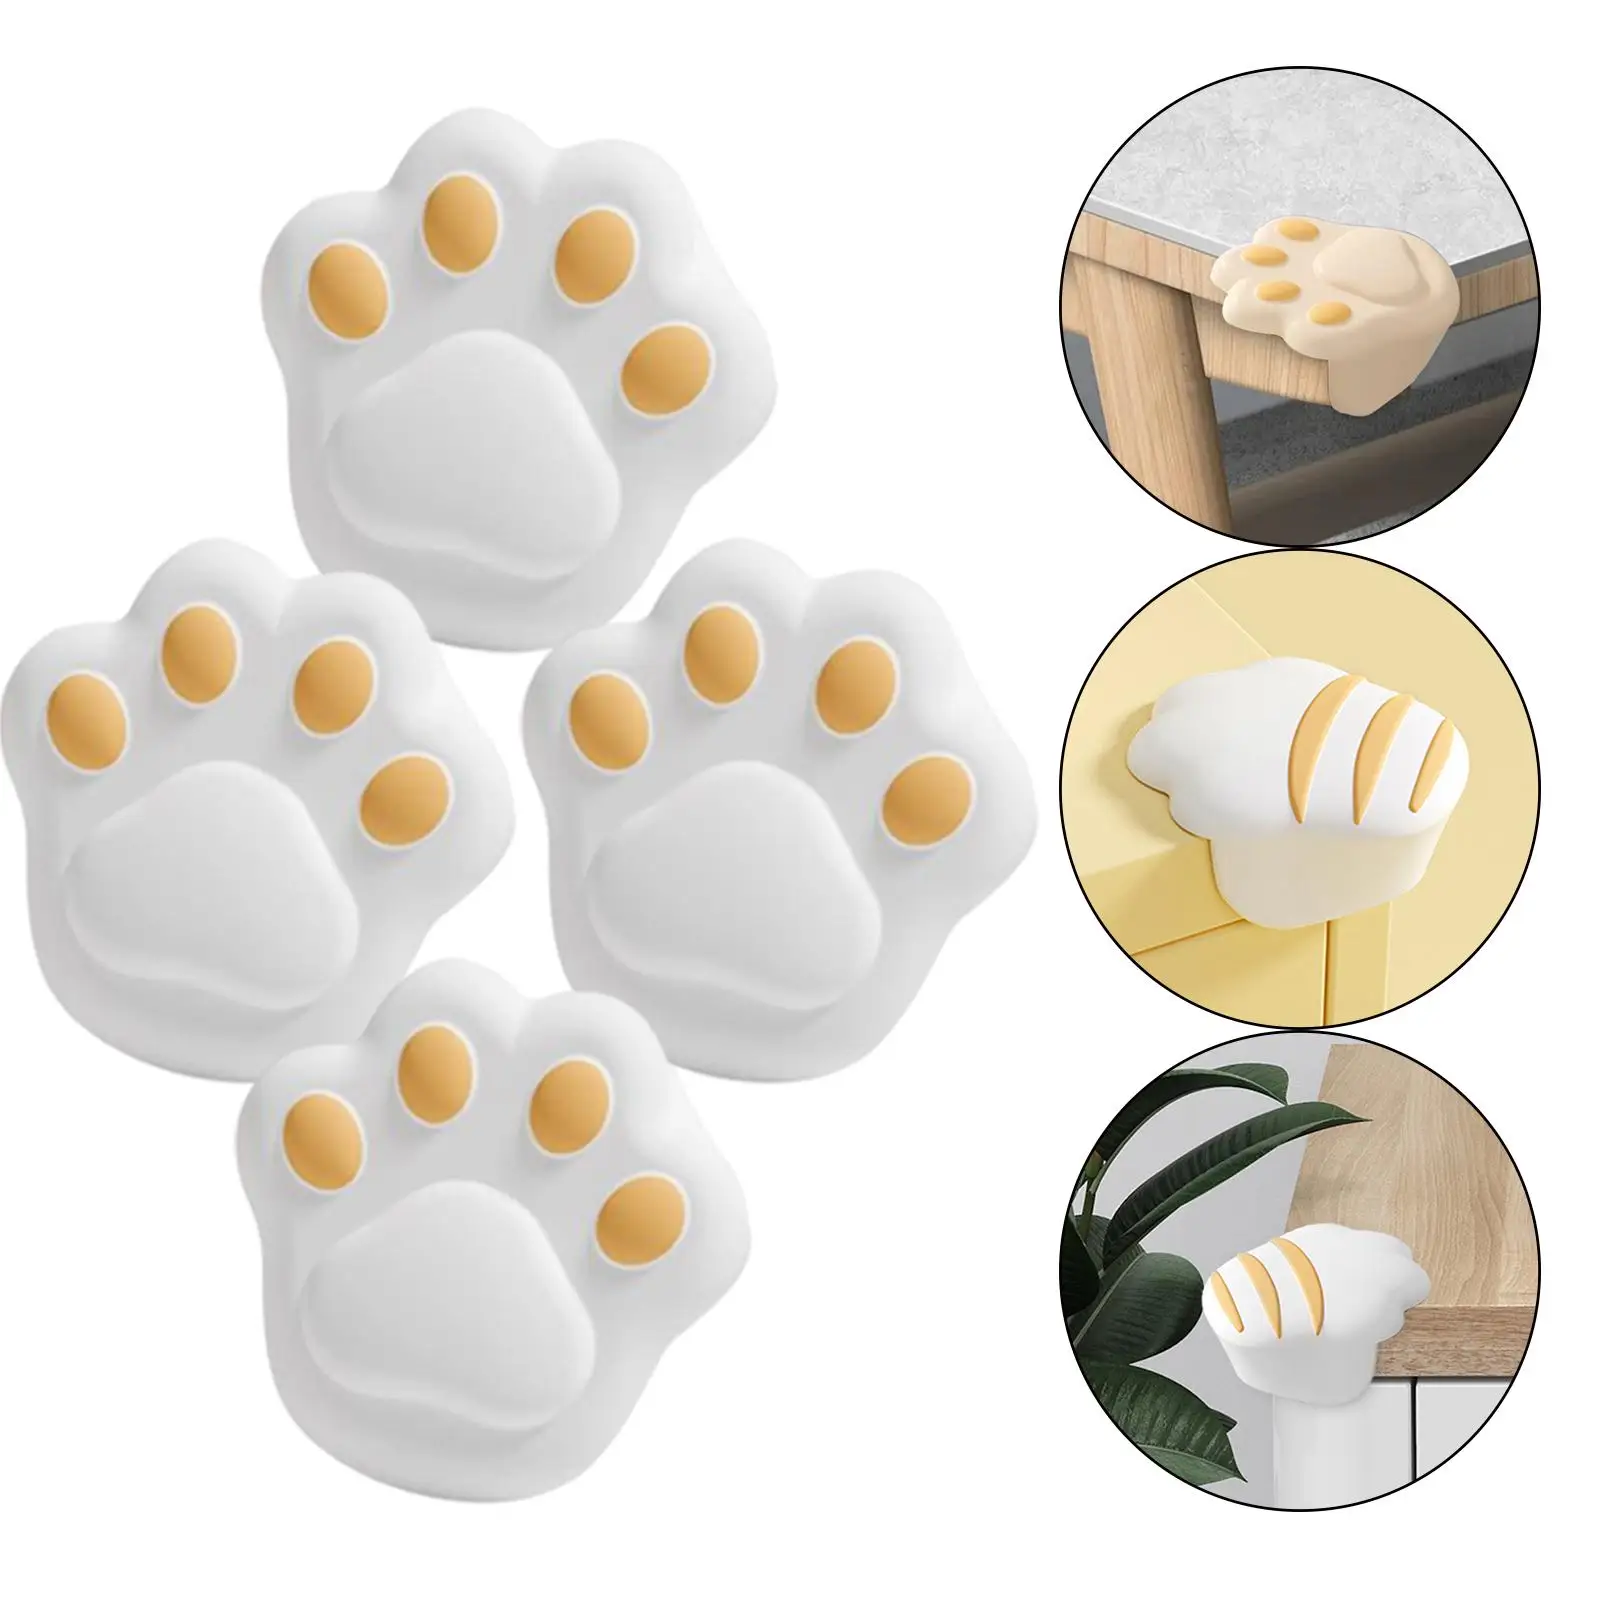 4pcs Child Baby Safety Cartoon Furniture Protector Soft Edge Table Corners Protection Guards Cover for Toddler Infant